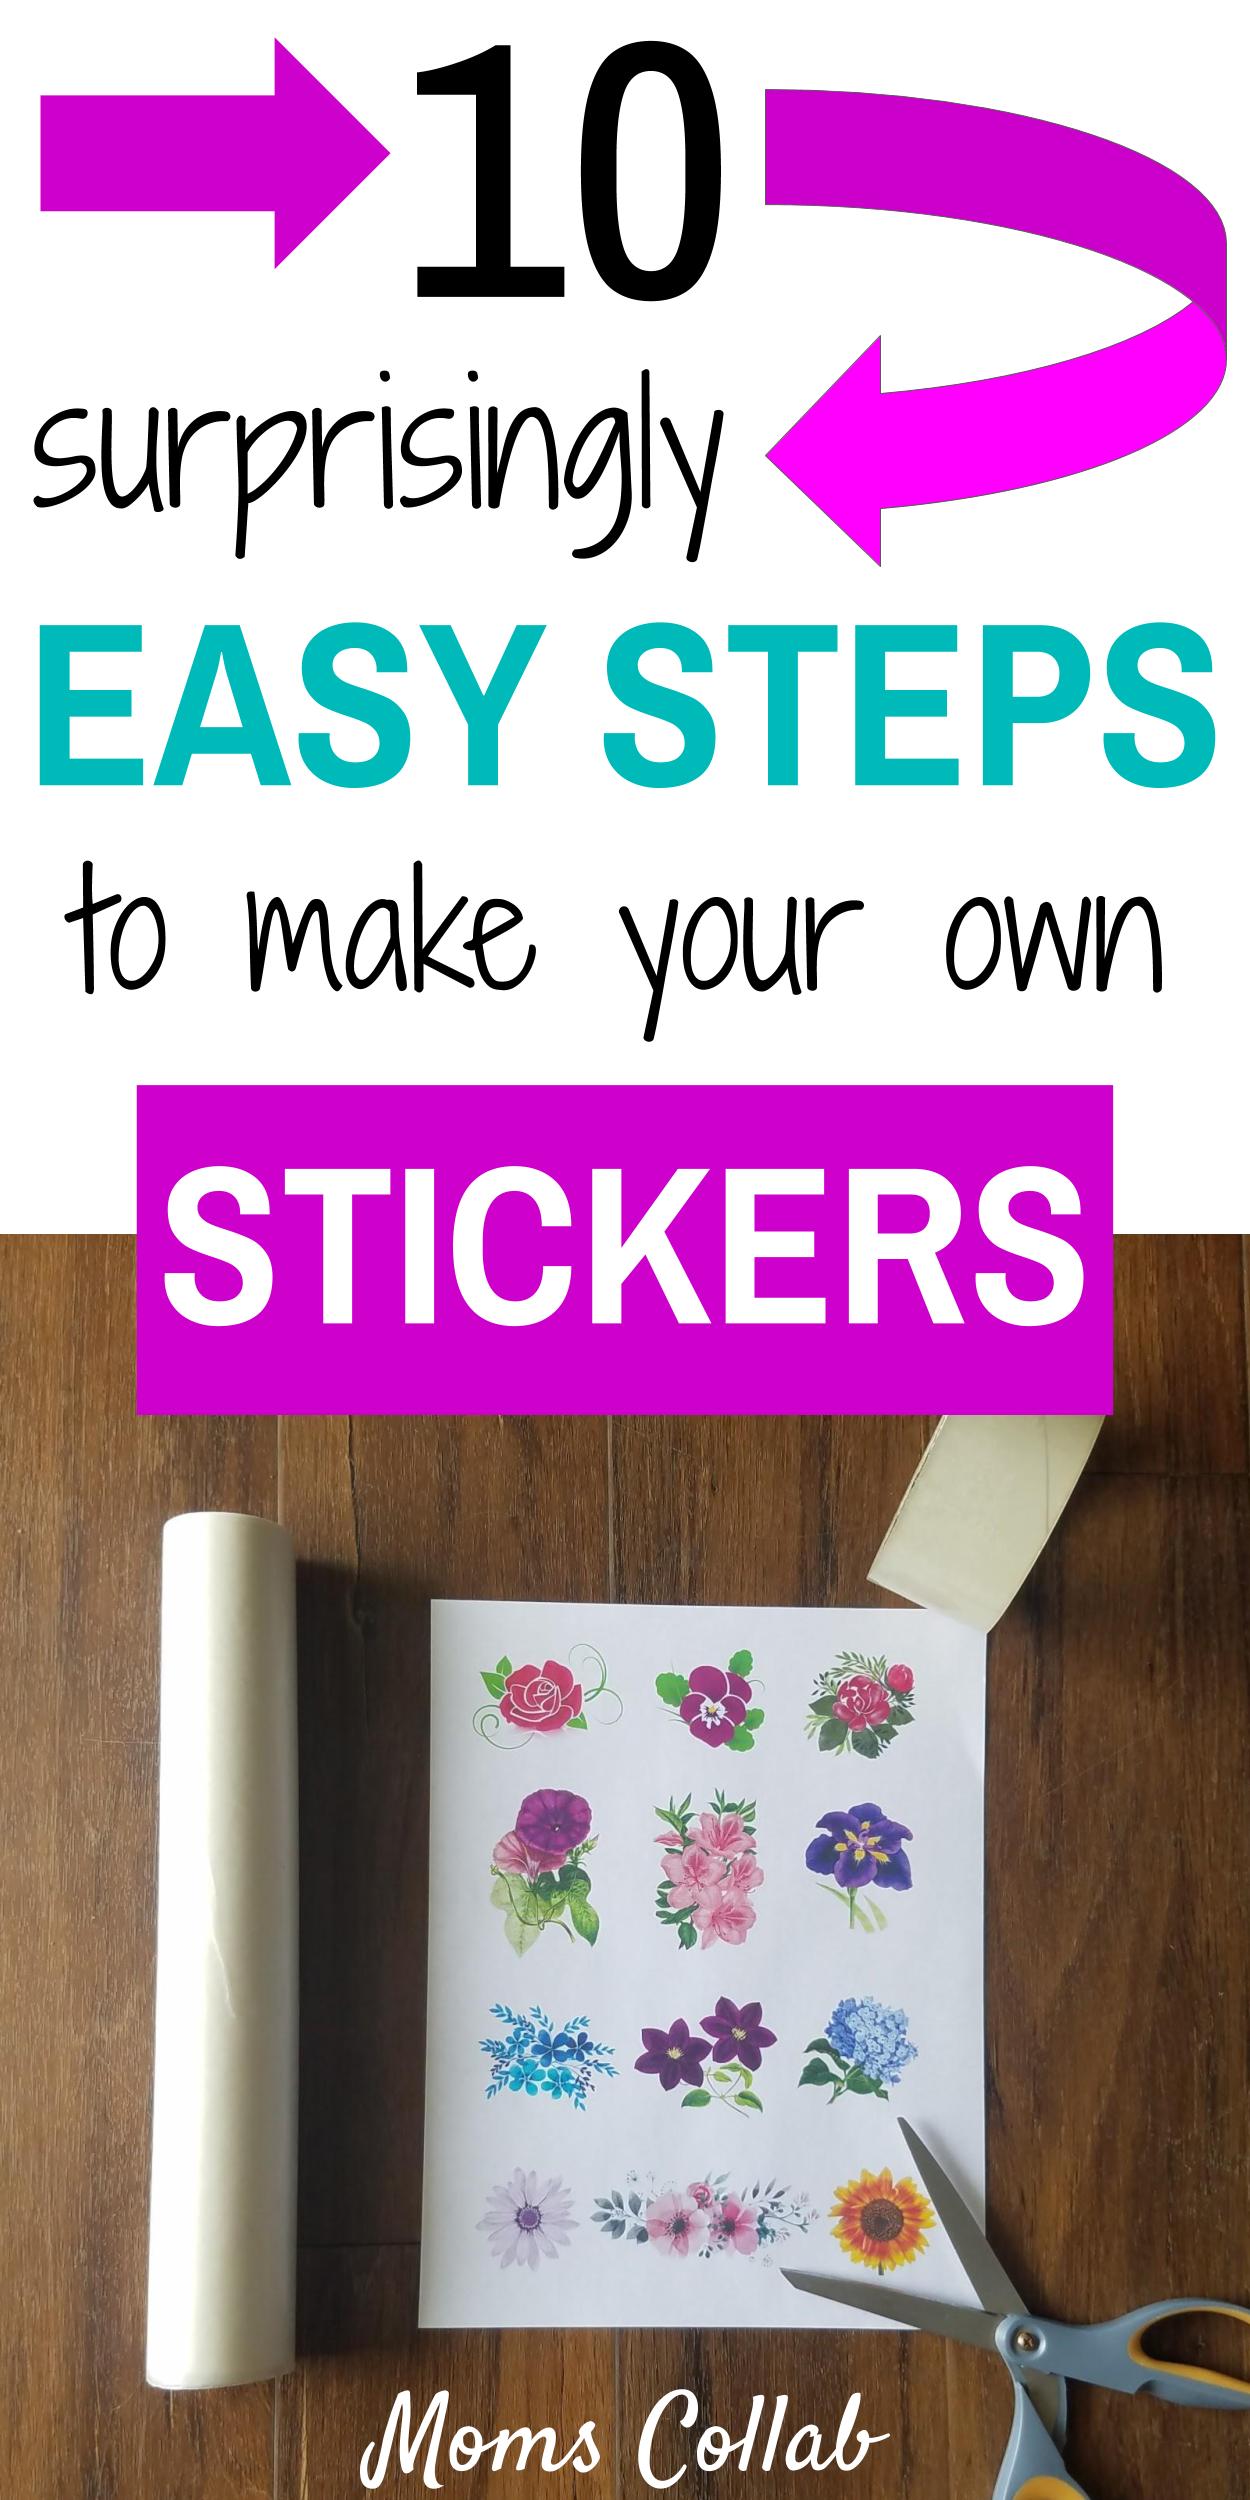 Easy Steps to Make Your Own Stickers